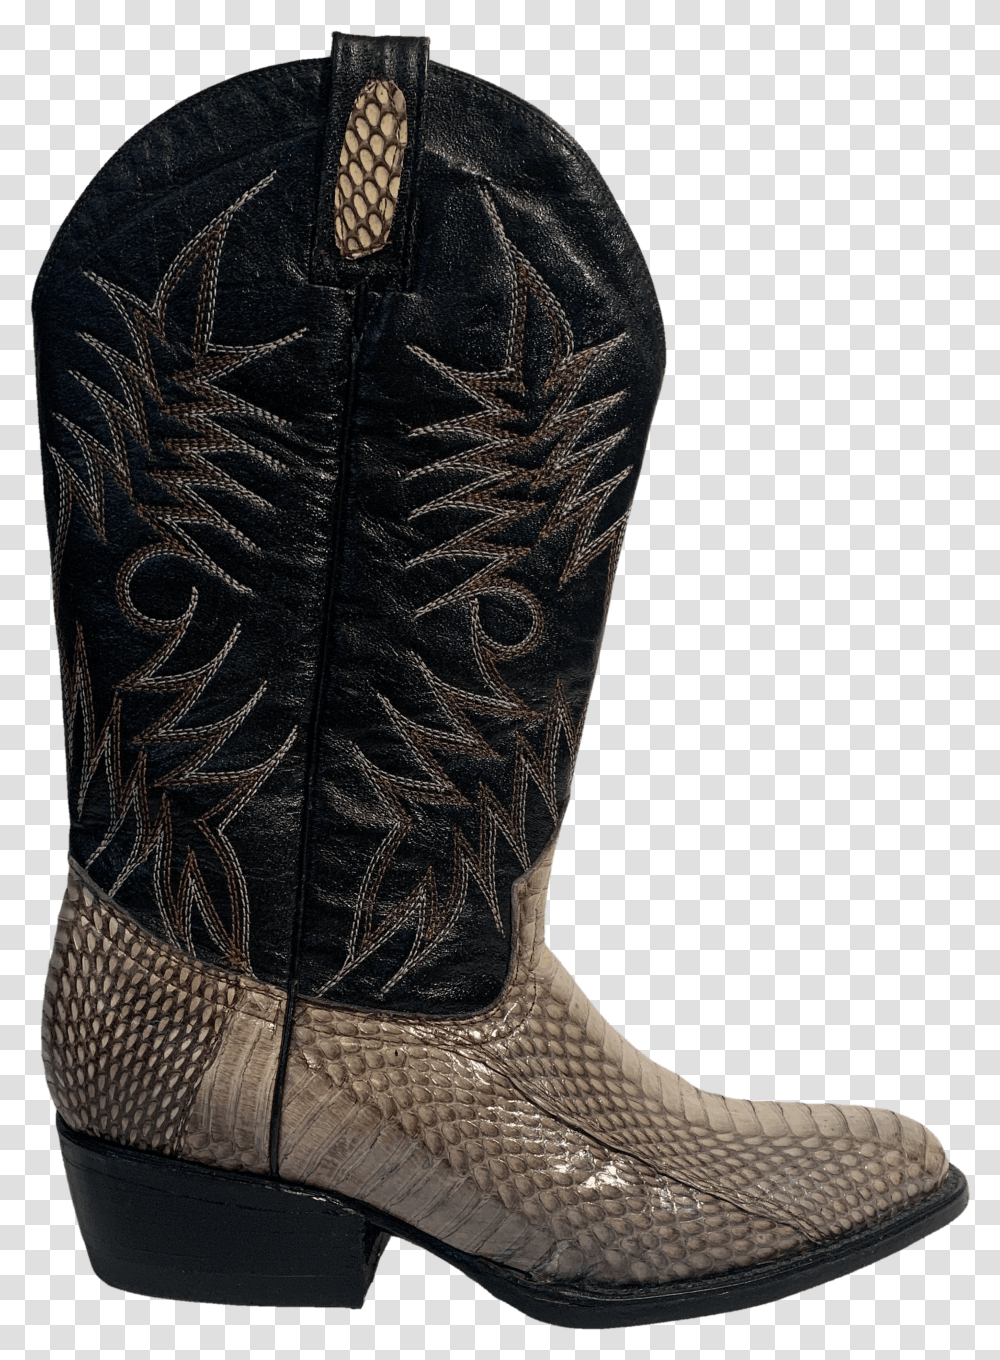 70s Cowboy Boots By Oeste Boots Cowboy Boot Transparent Png